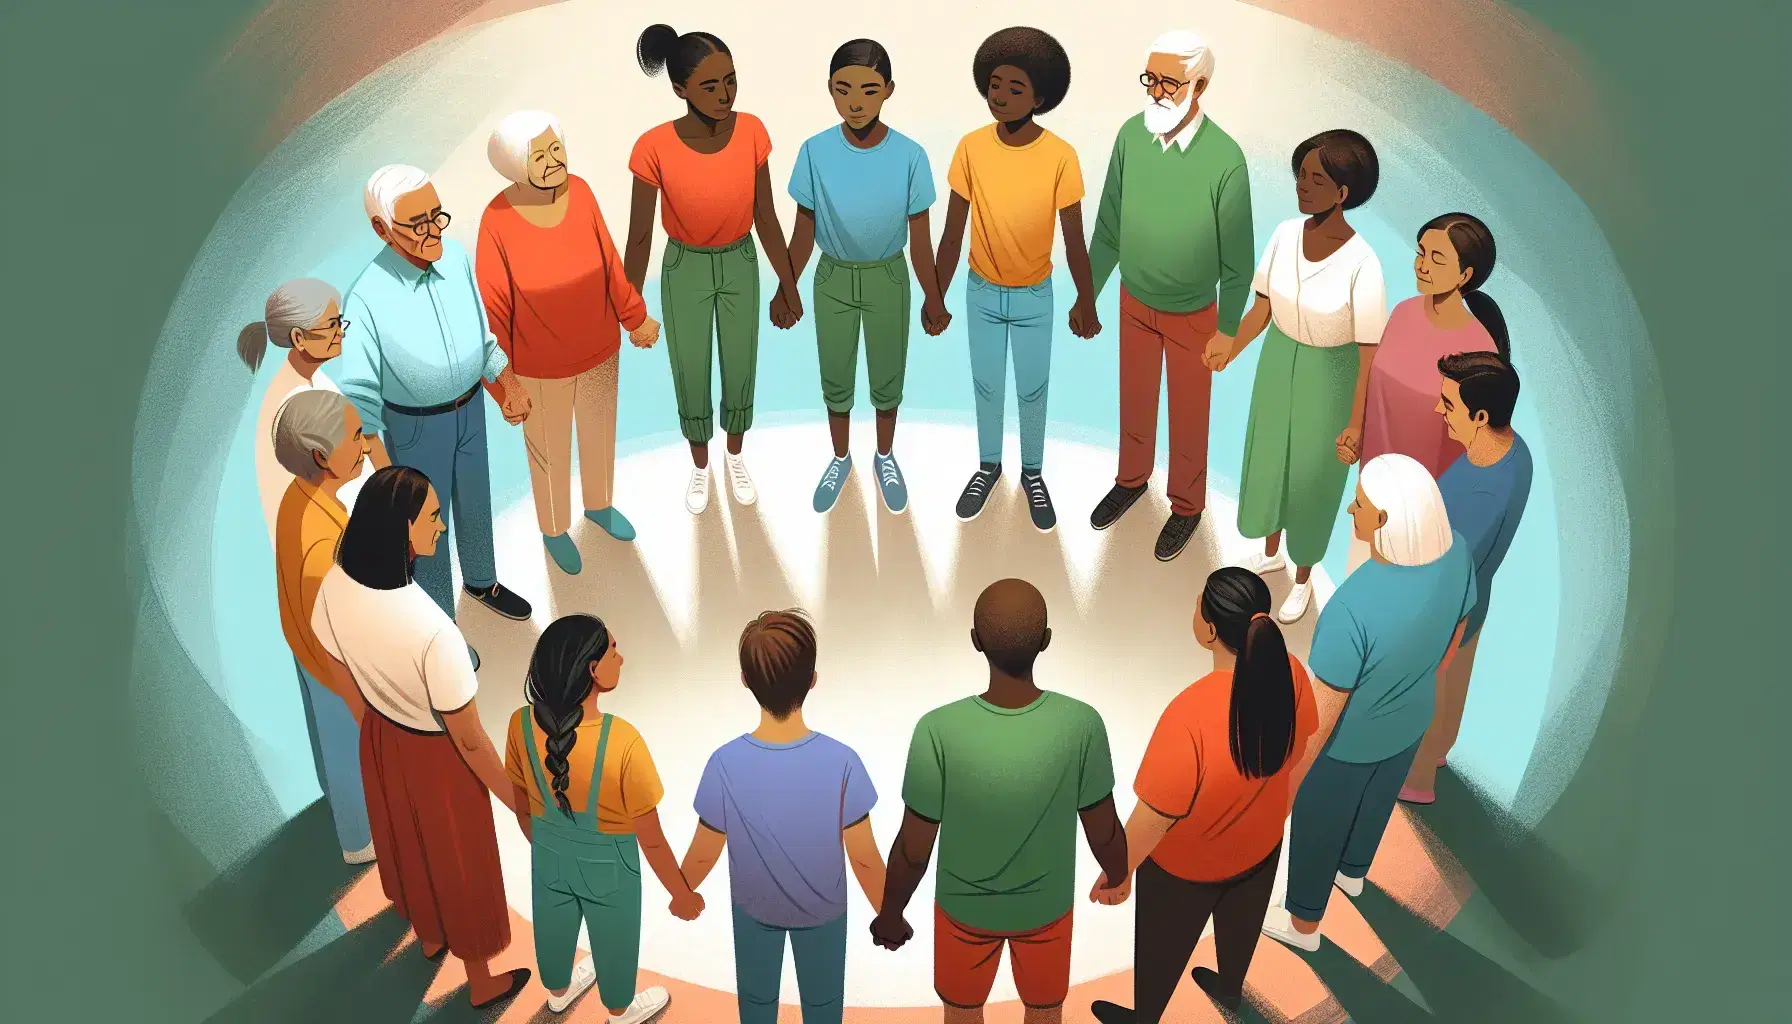 Multi-ethnic group of people of different ages and genders holding hands in a circle, wearing colorful clothing on a blue-green gradient background.